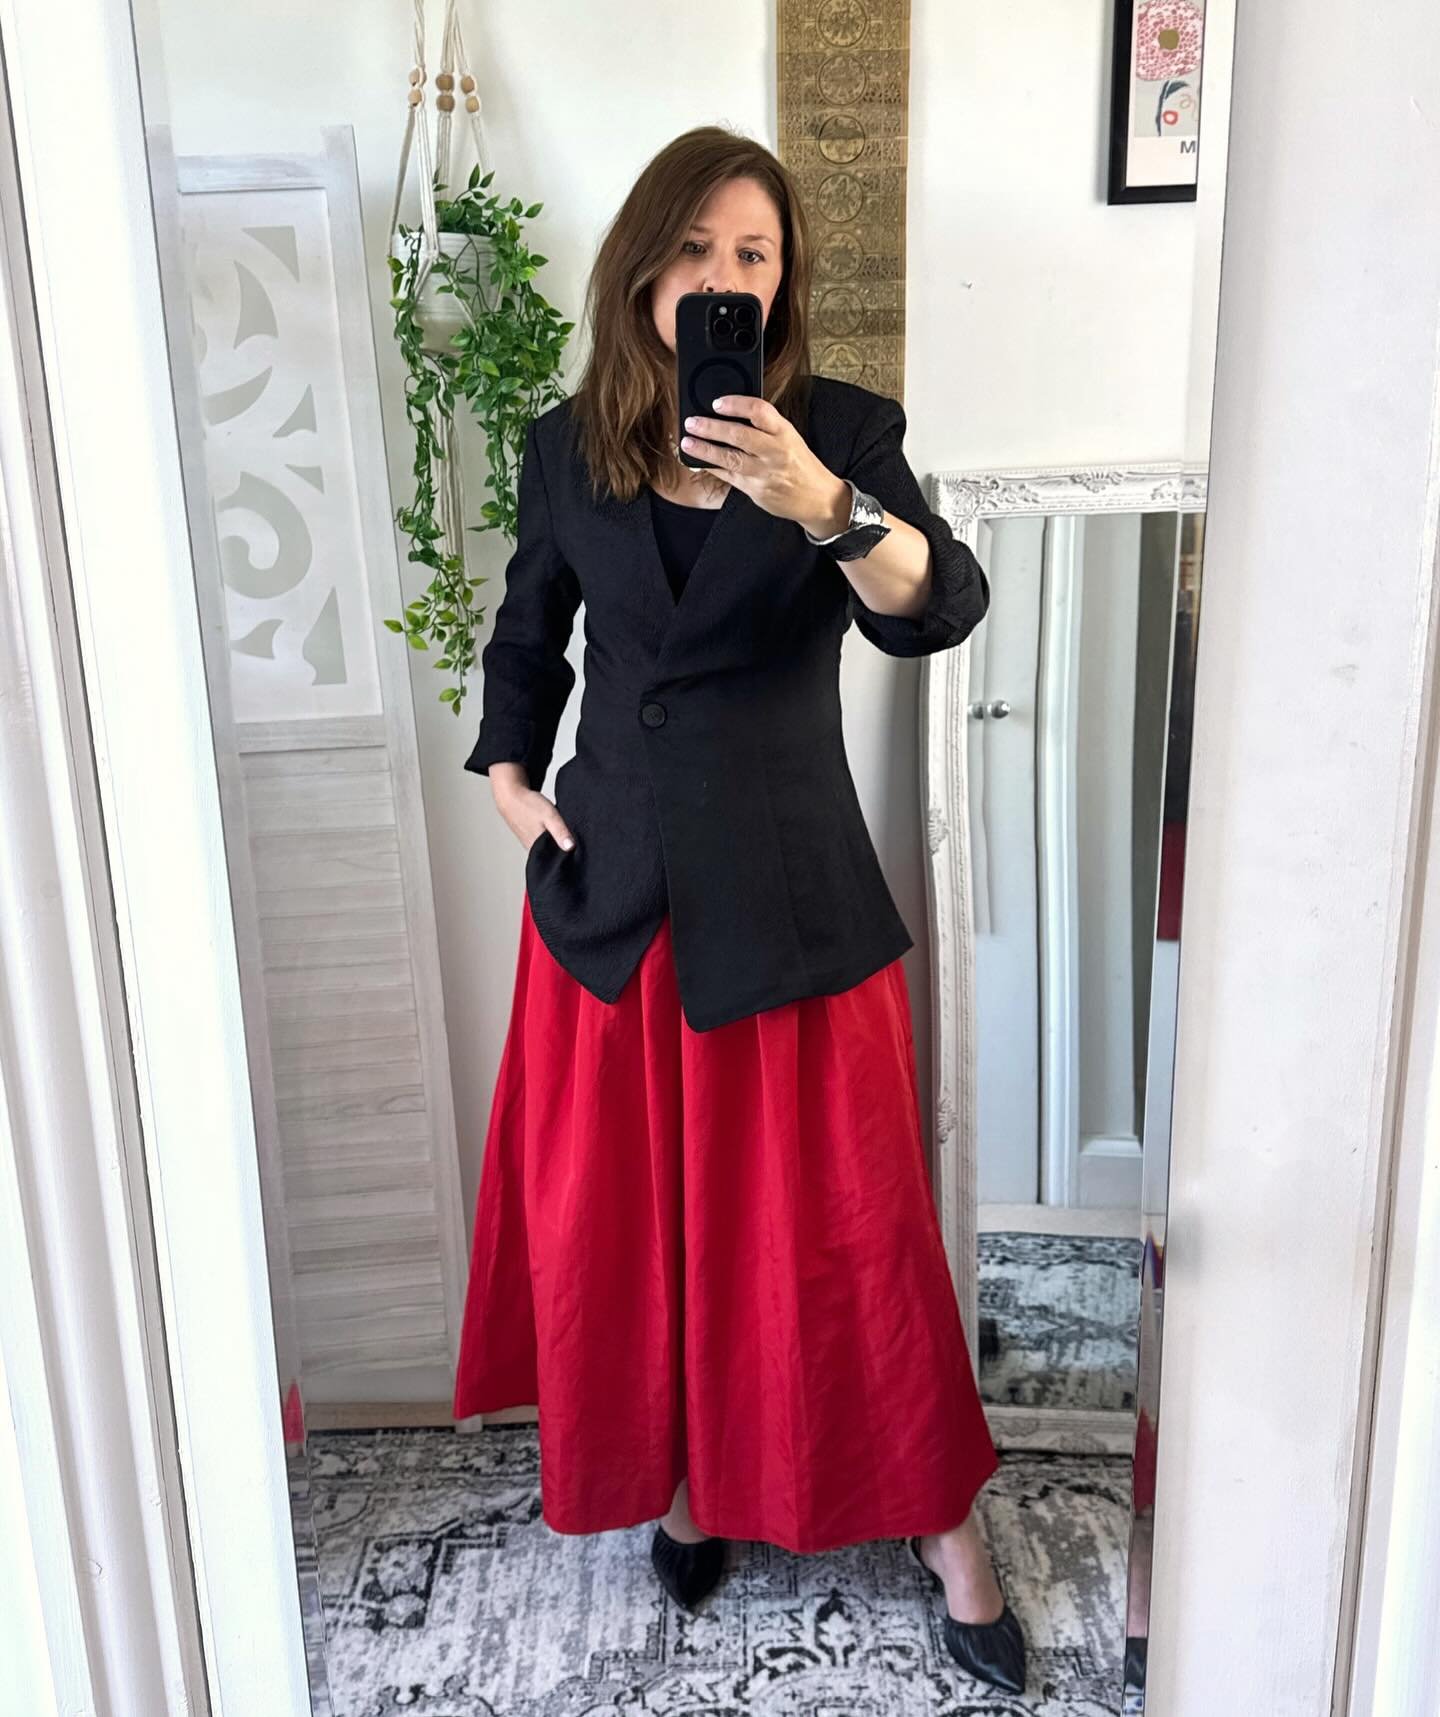 A couple of outfits worn this week, based around my new bargain jacket see stories. Balancing out padded shoulders with a full skirt and barrel leg jeans. Here I'm all about a balanced silhouettes. 😀 
.
.
.
.
.
.
.
.
#alwaysstylish #personalstylist 